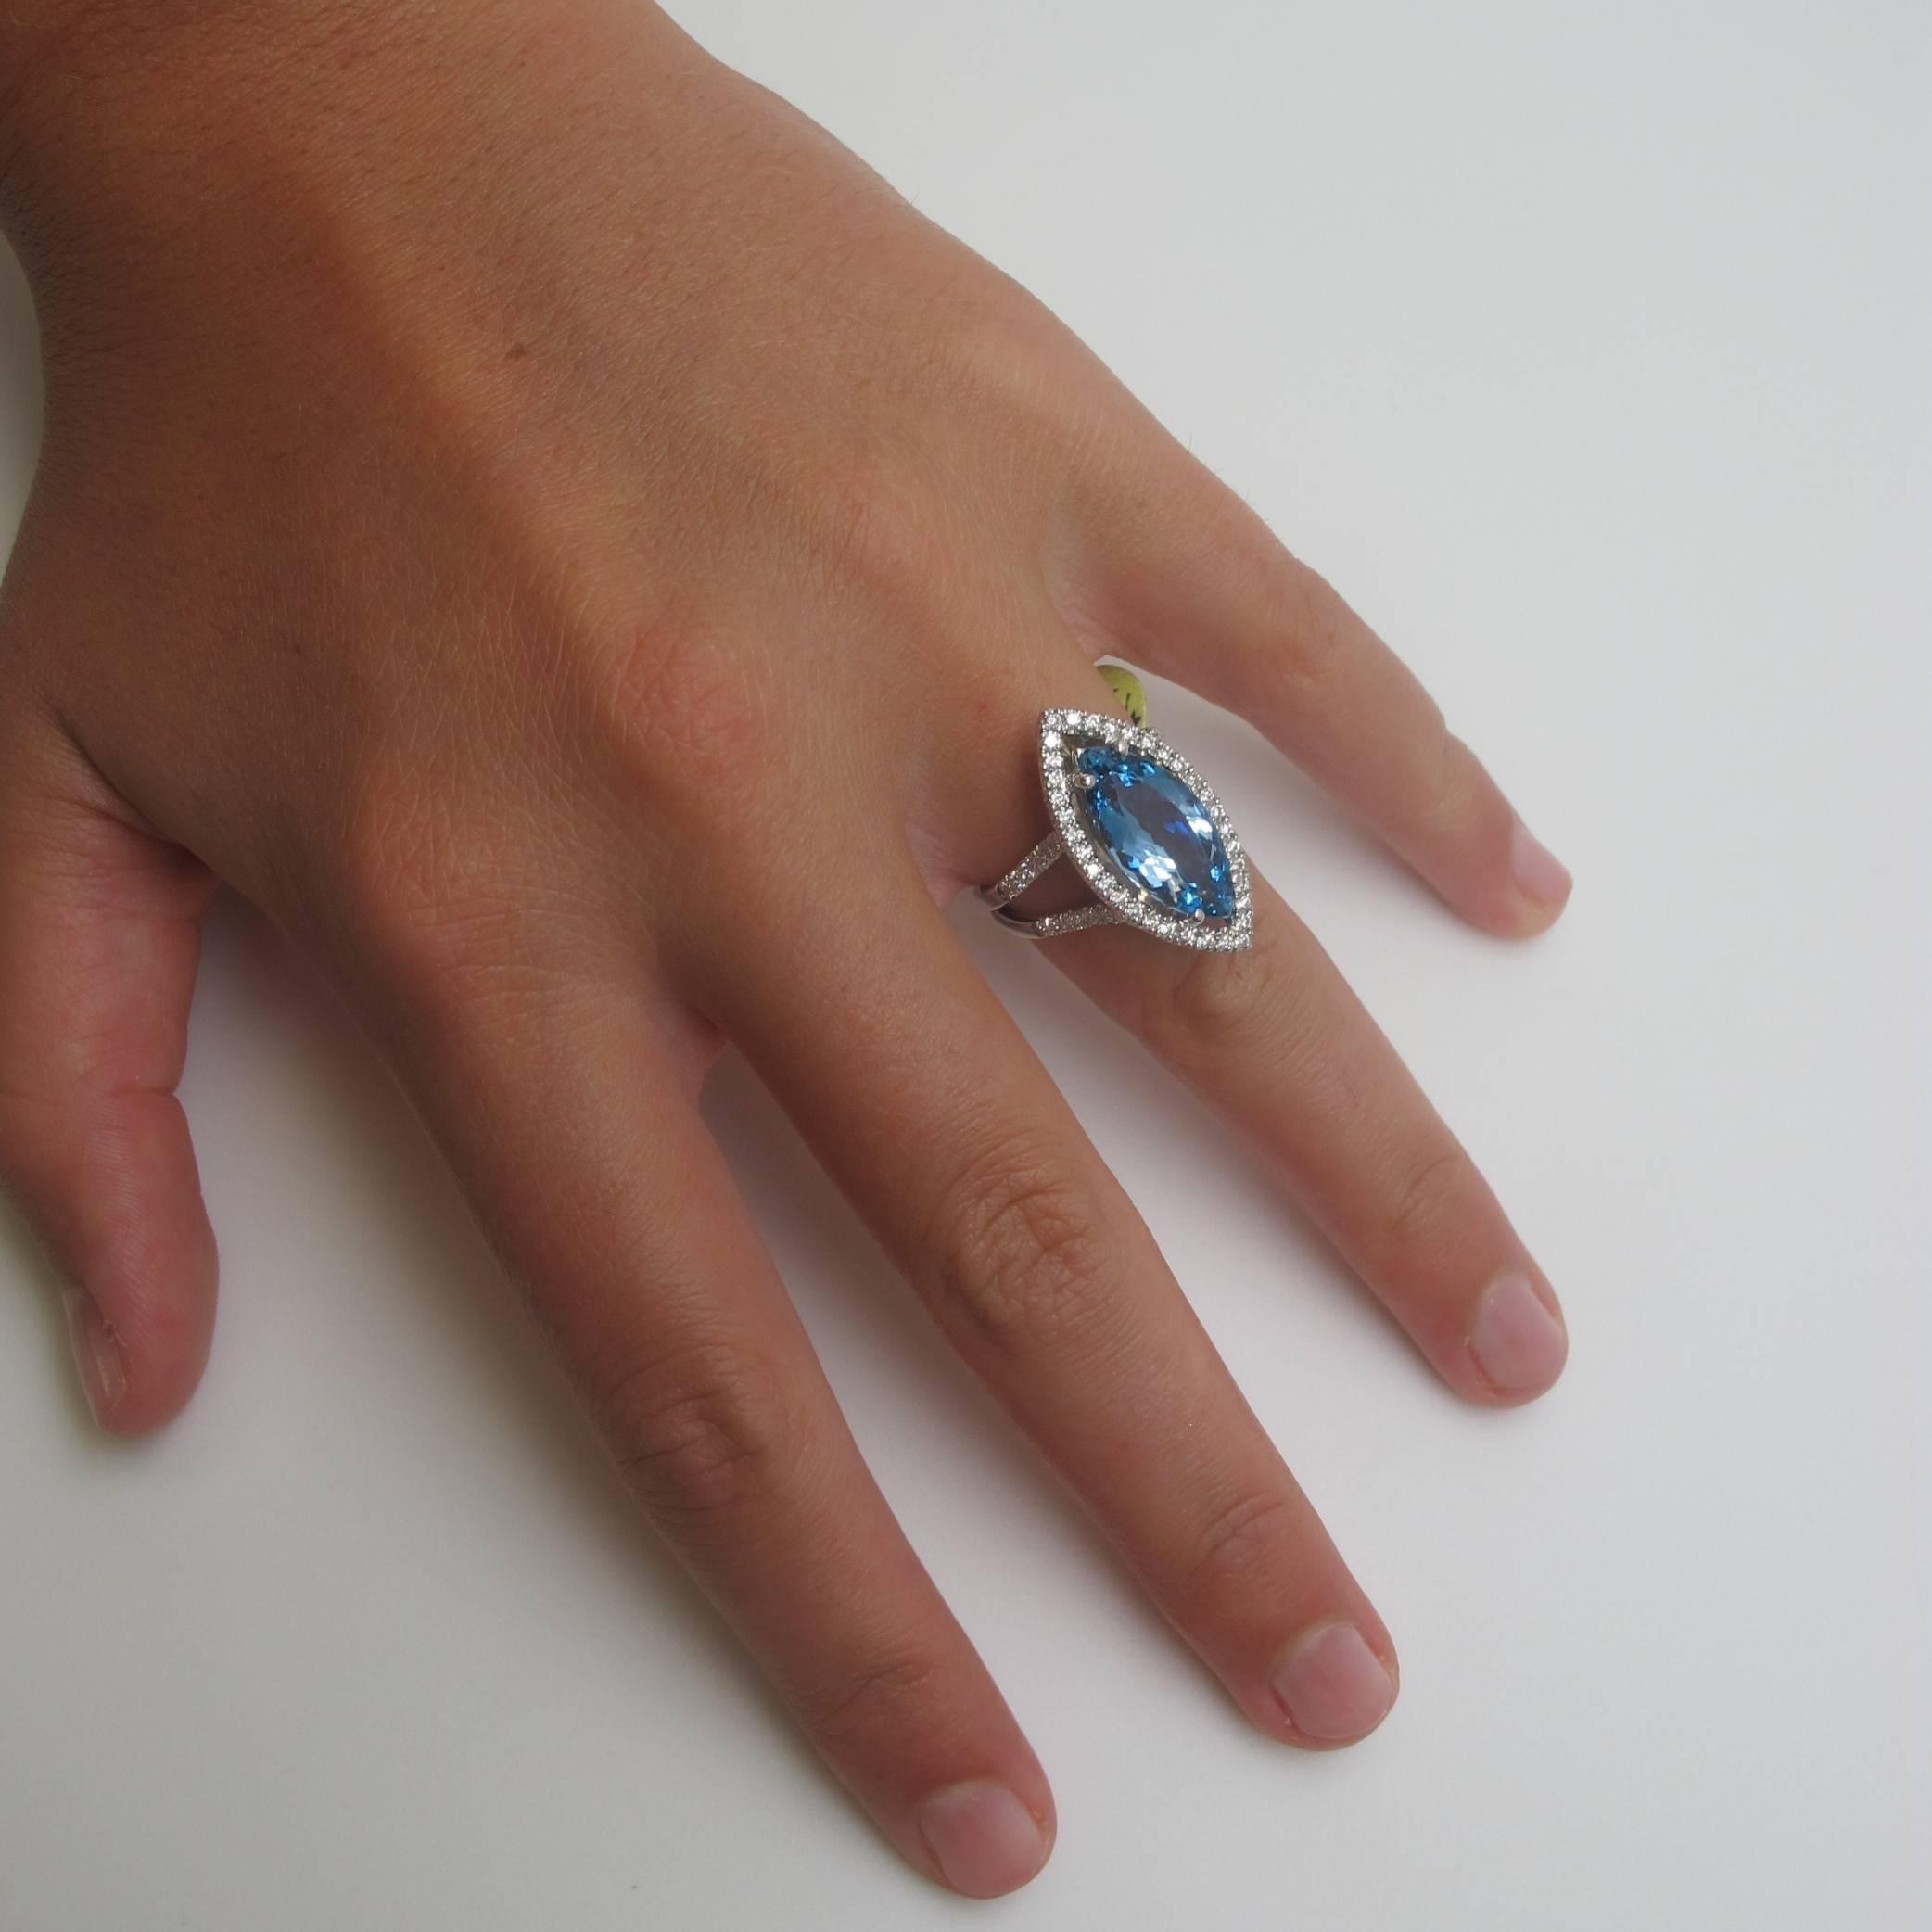 A natural, deep aqua-blue color Aquamarine (18.0x8.50mm/4.20 carats) of the finest quality is featured in this ring. Such a deep color of Aquamarine is quite rare. It is set in a custom-made 18k white gold setting with round brilliant cut White